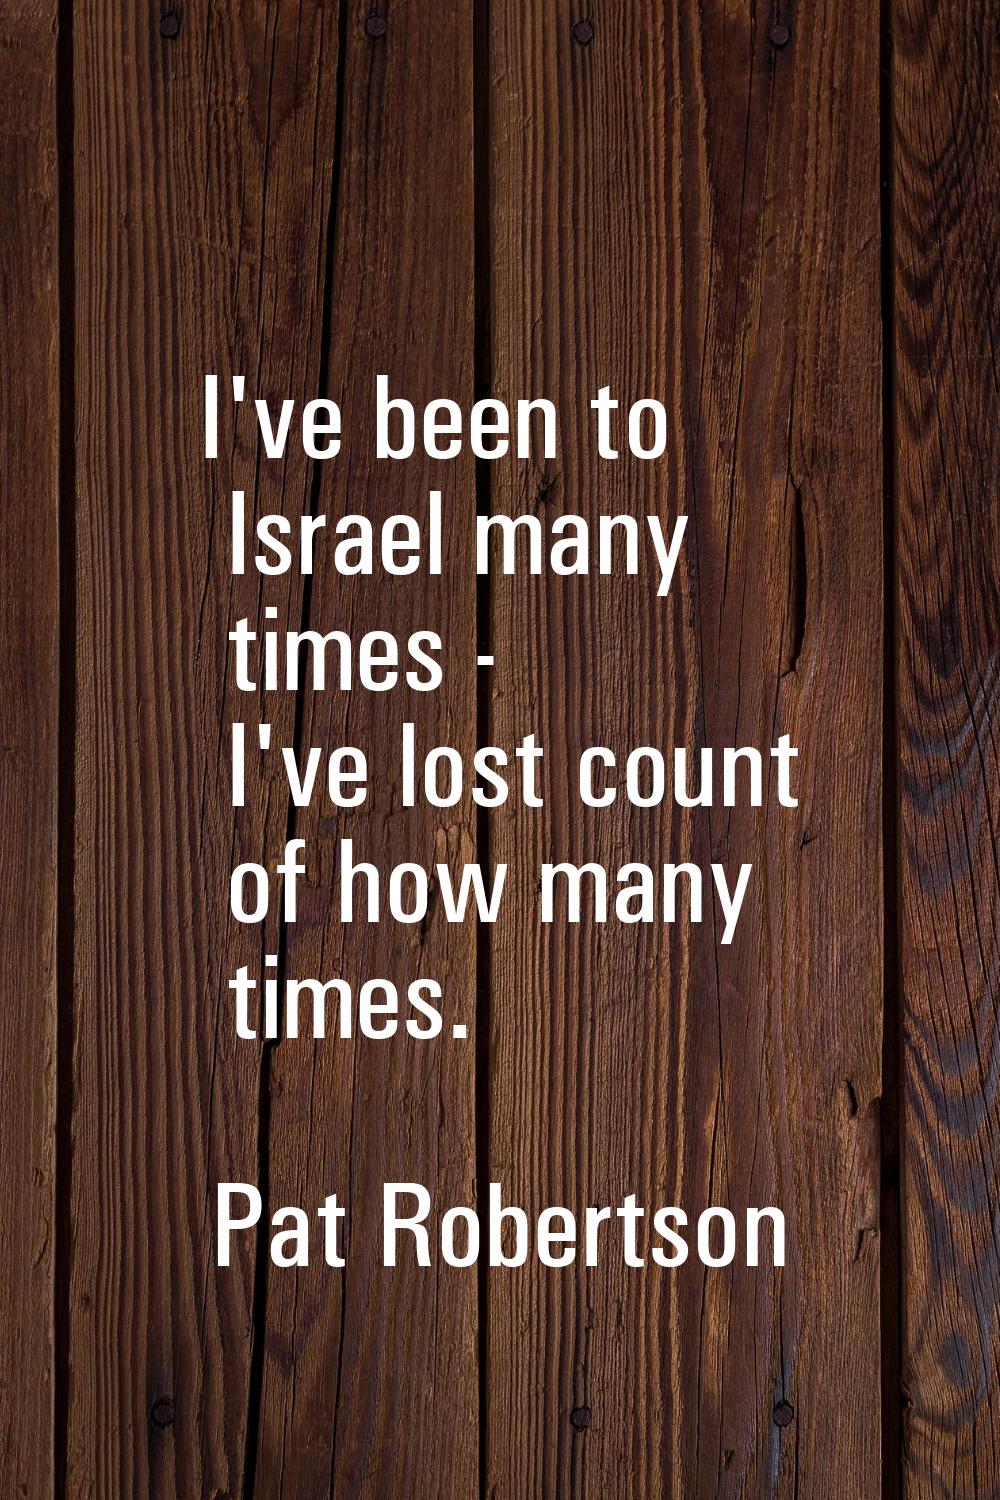 I've been to Israel many times - I've lost count of how many times.